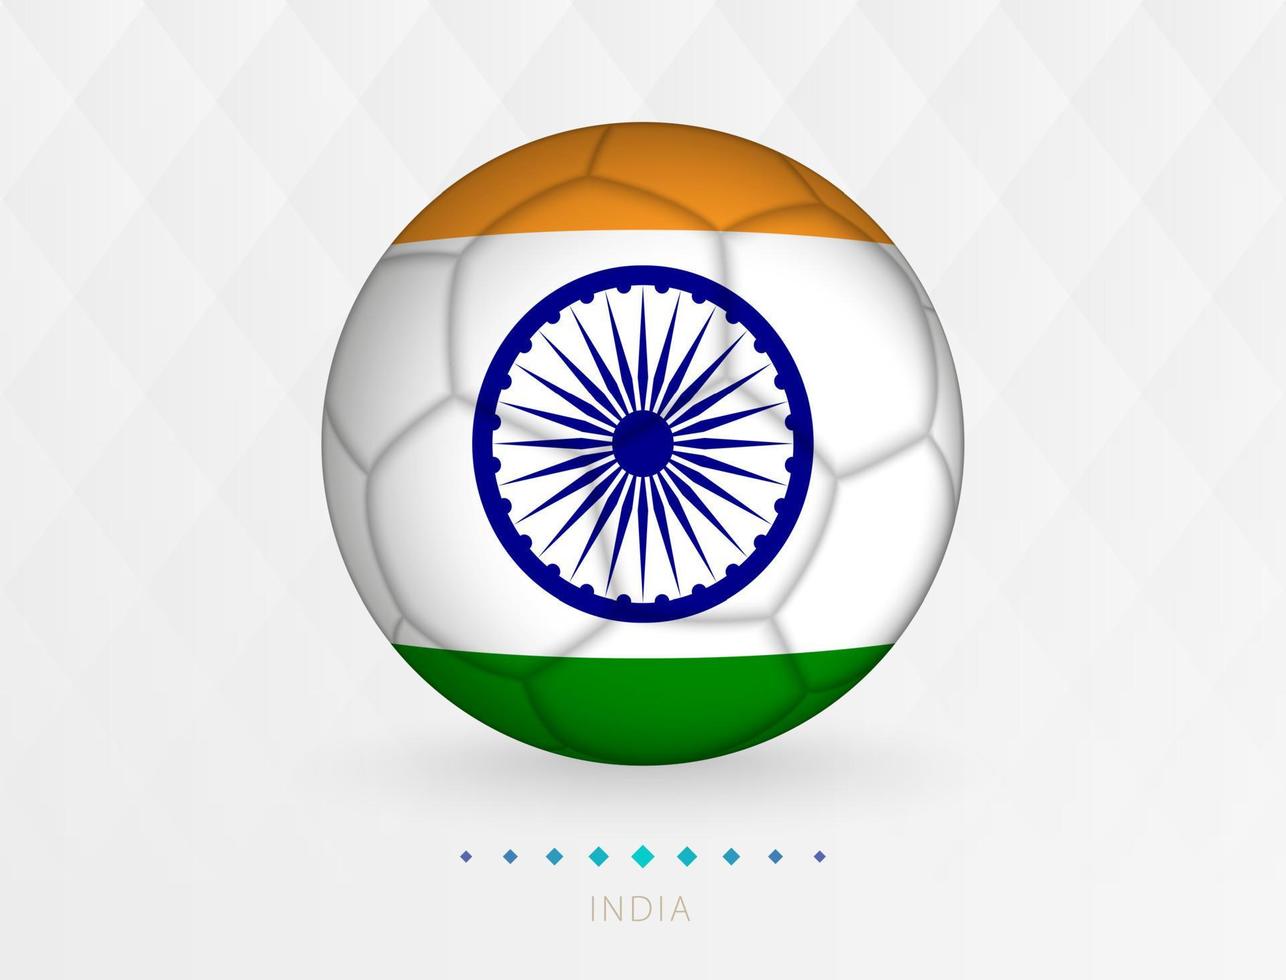 Football ball with India flag pattern, soccer ball with flag of India national team. vector